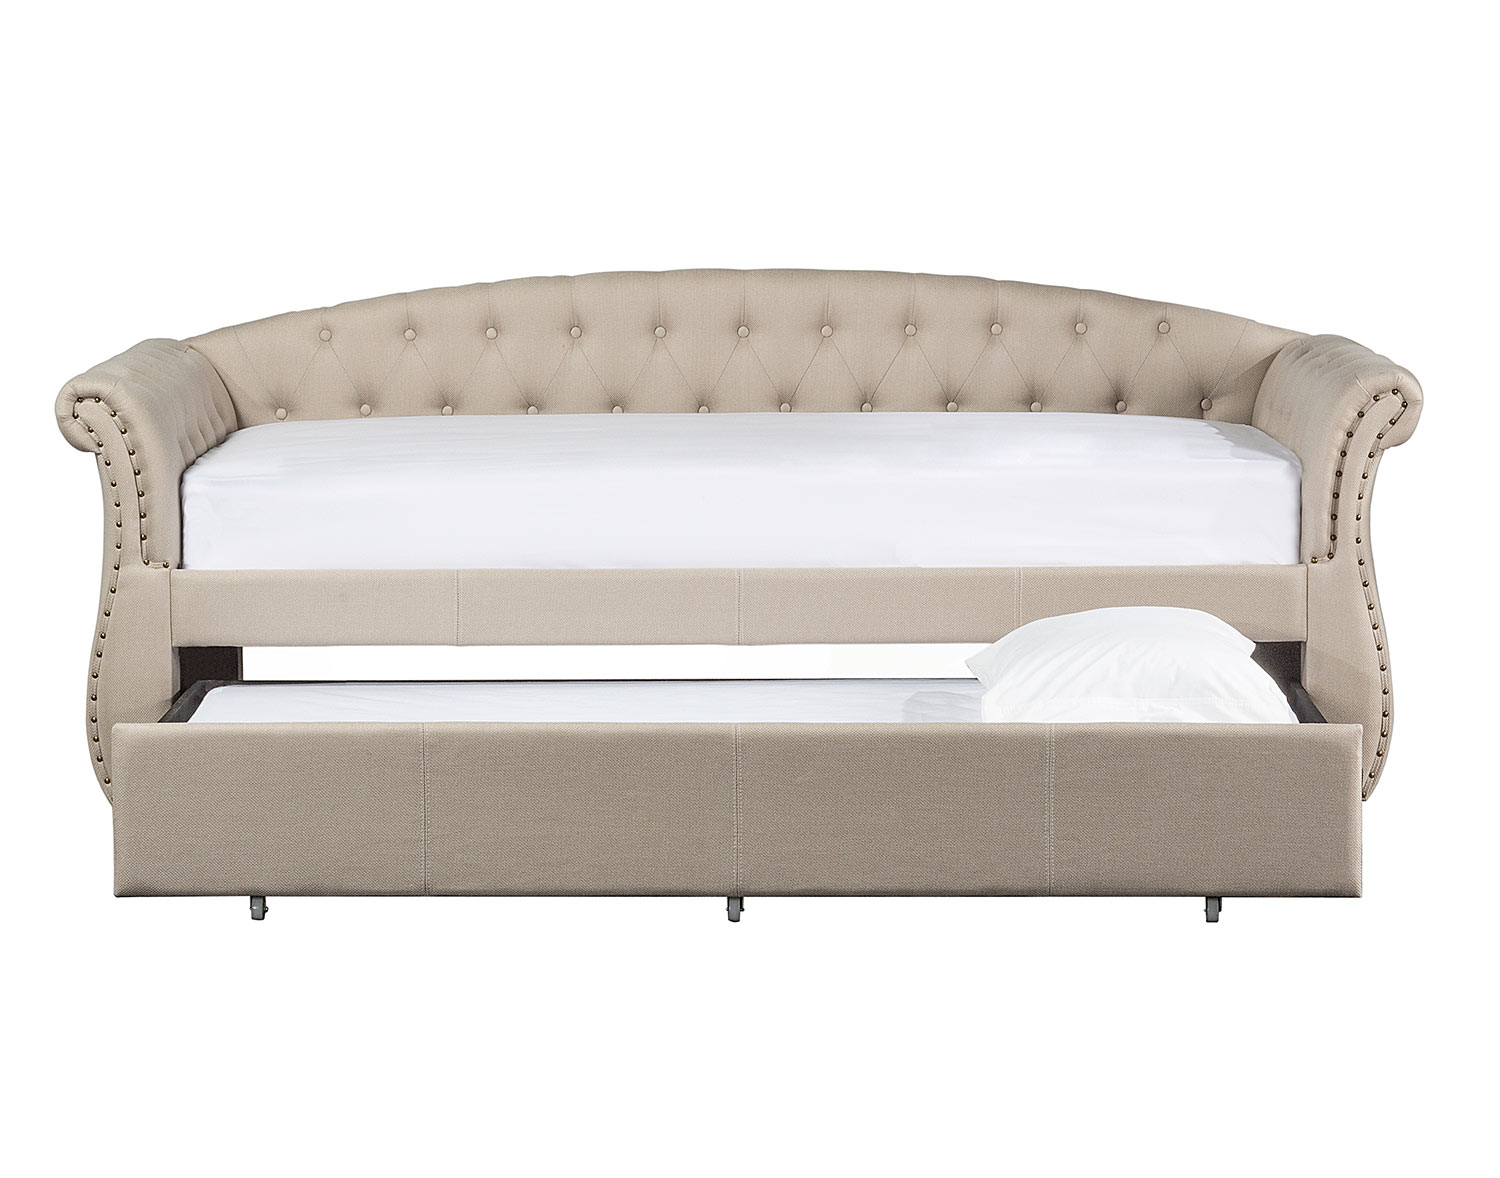 Hillsdale Harlow Twin Daybed and Trundle - Soft White/Linen Sandstone